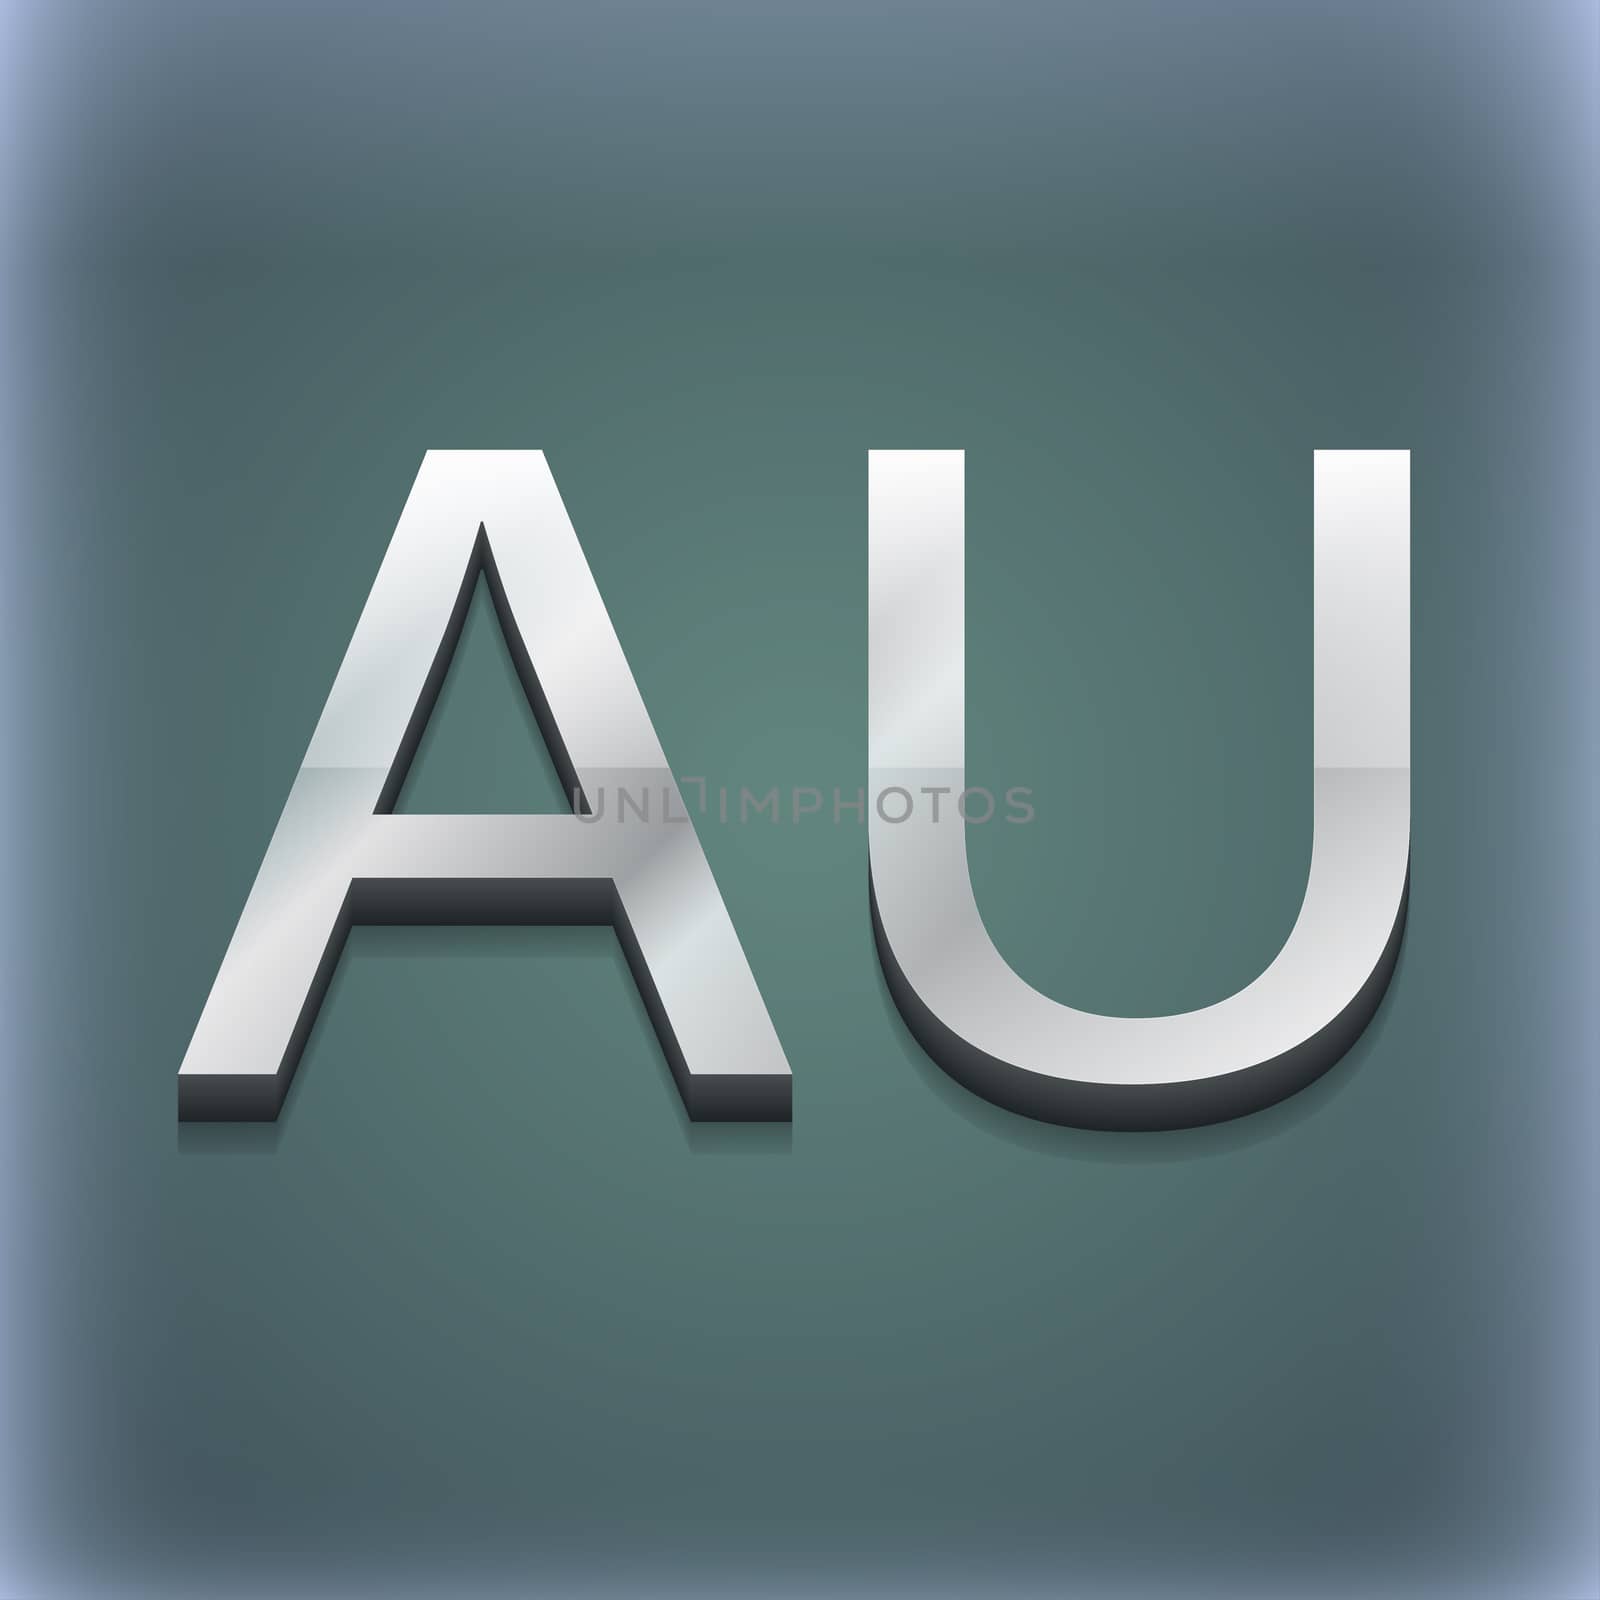 australia icon symbol. 3D style. Trendy, modern design with space for your text illustration. Raster version